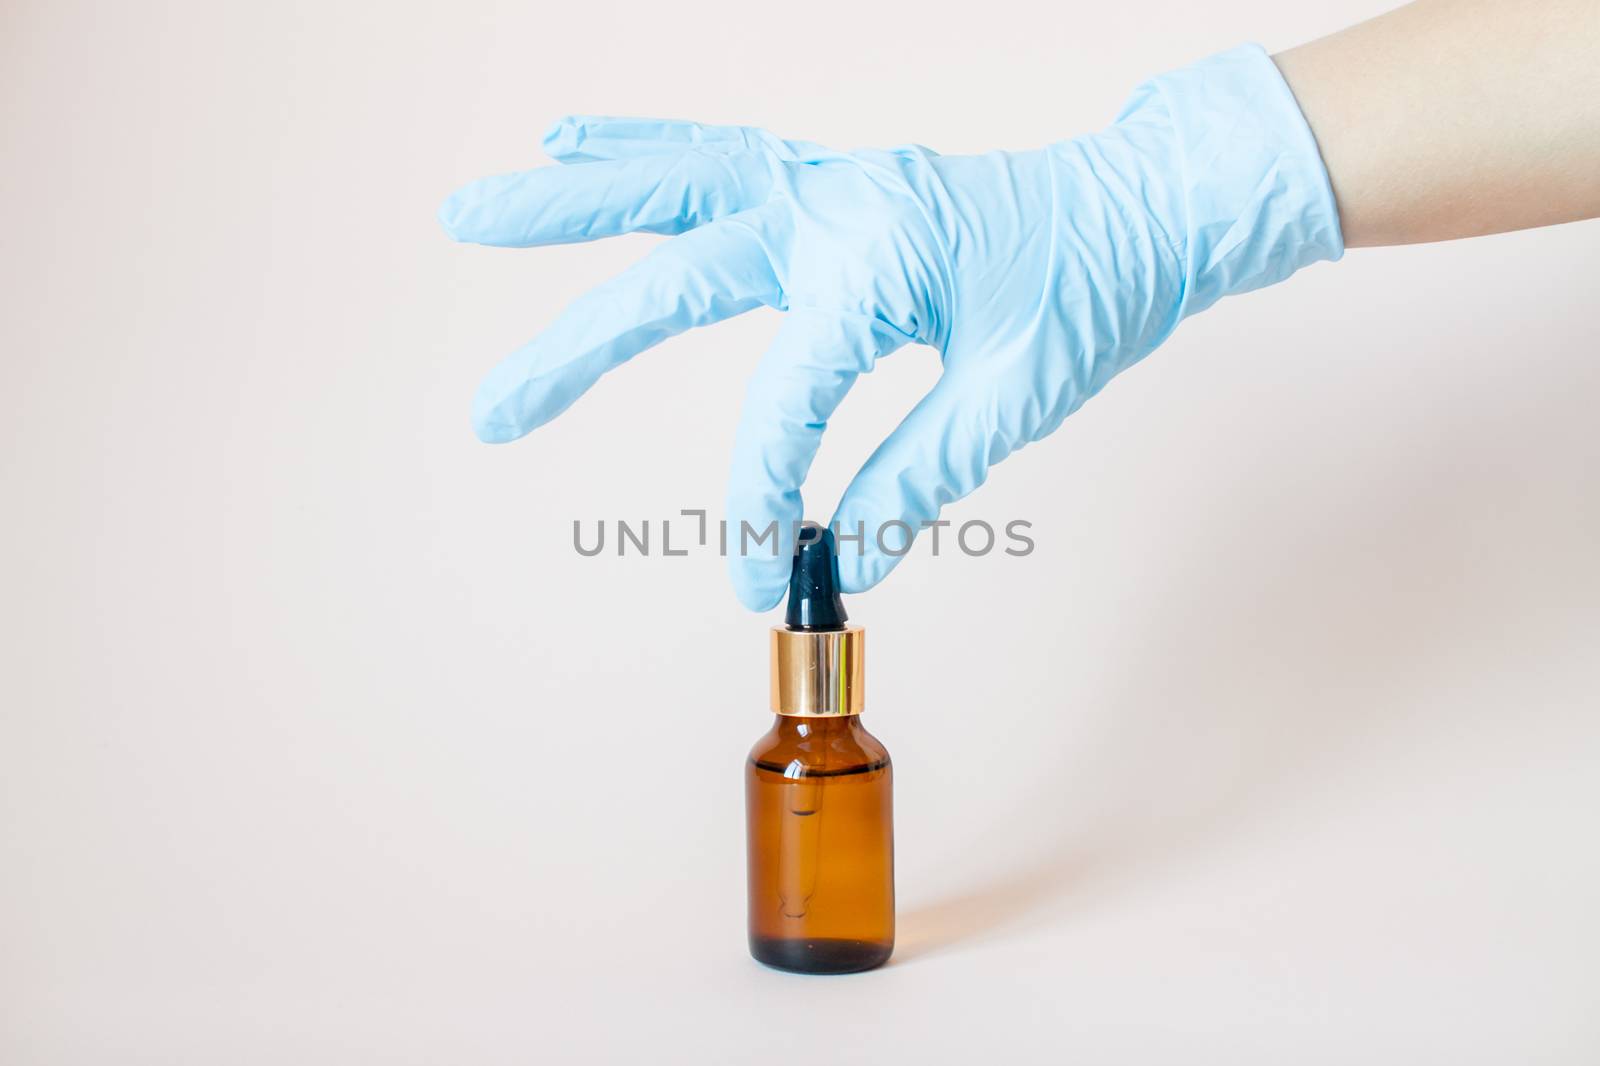 Bottles with serum for the face in his hands in protective medical rubber gloves on a light background. Beauty industry.